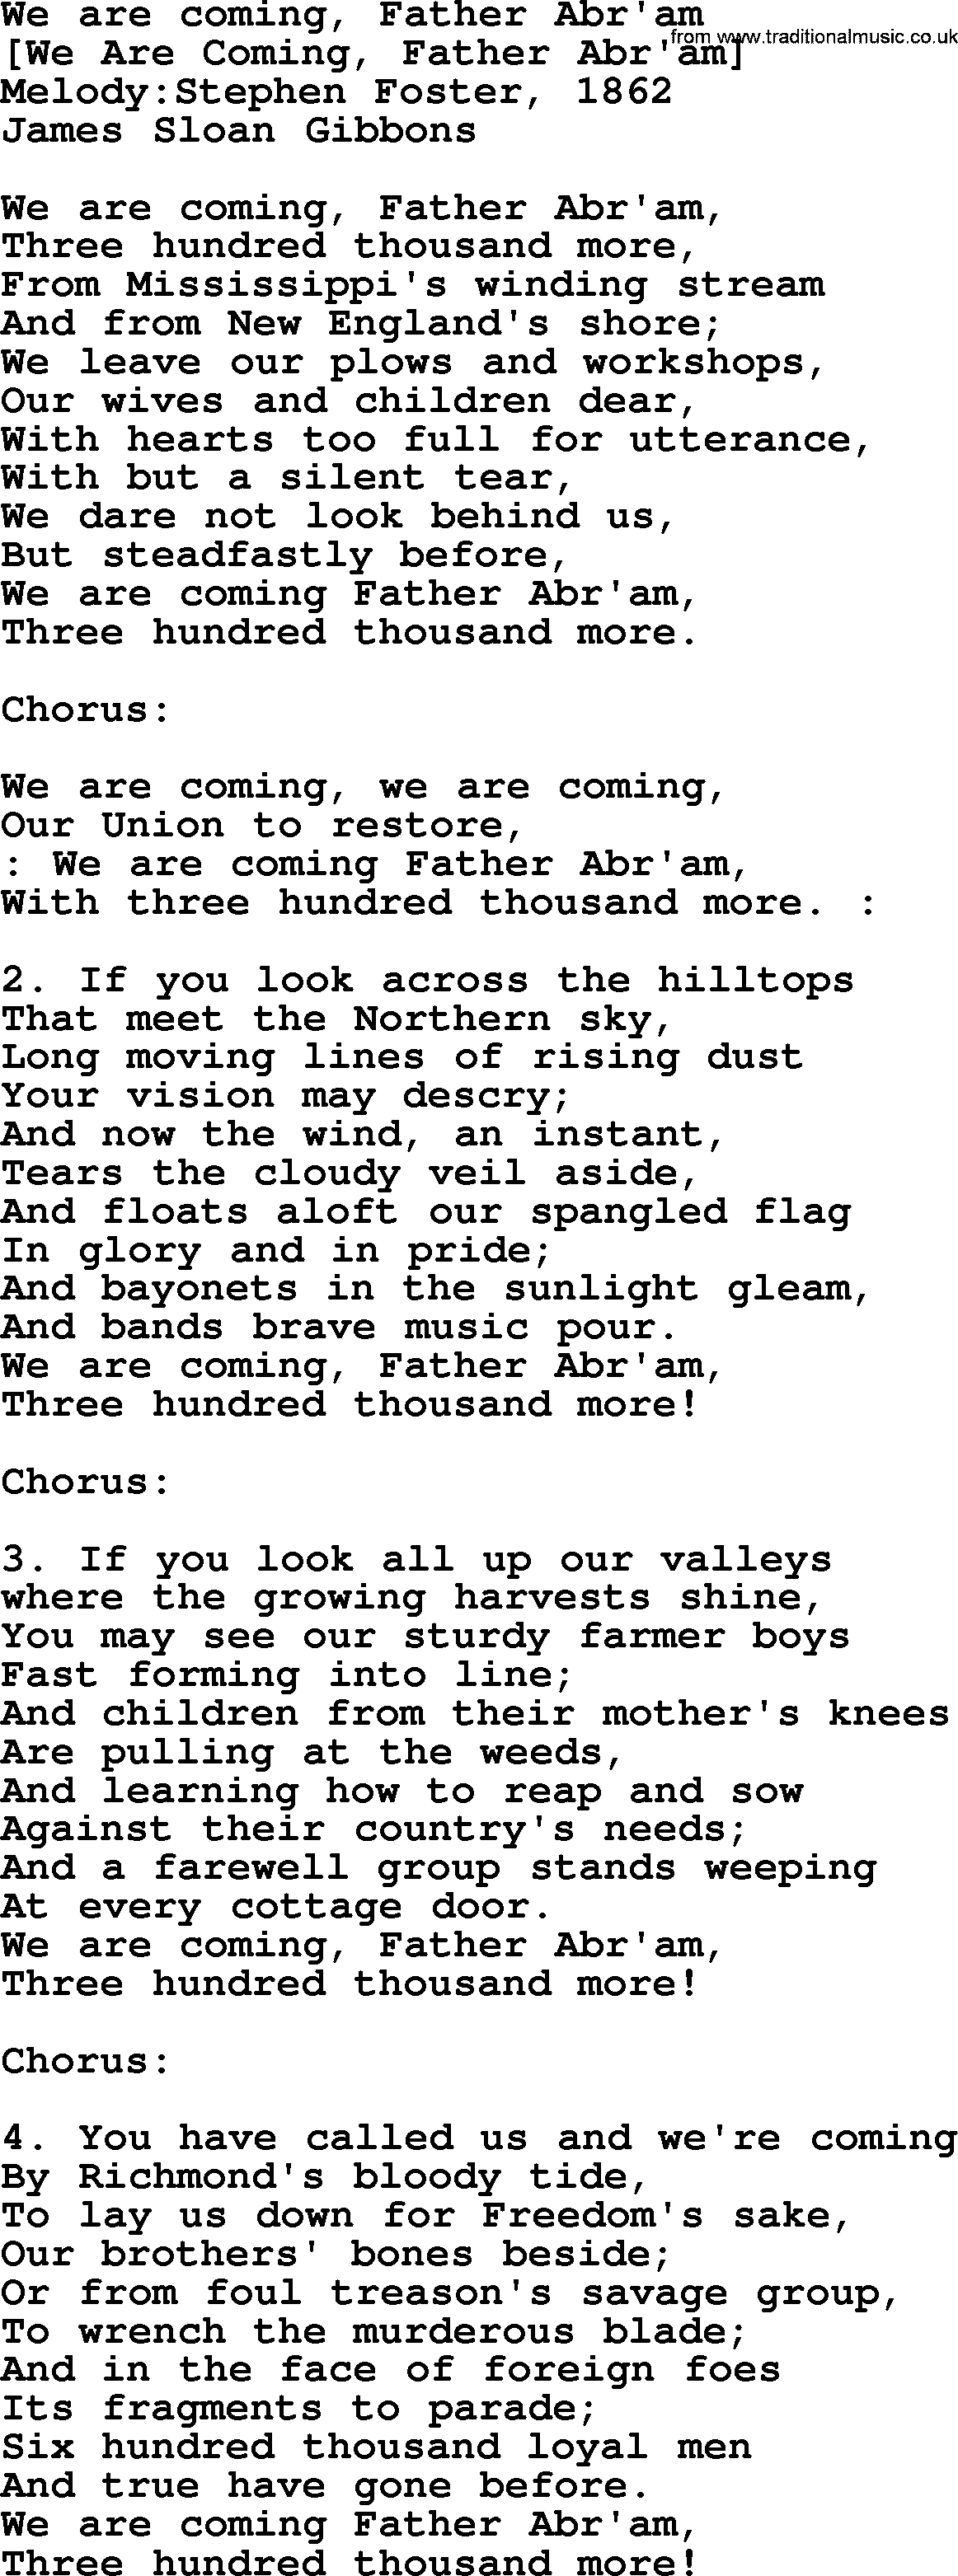 Old American Song: We Are Coming, Father Abr'am, lyrics